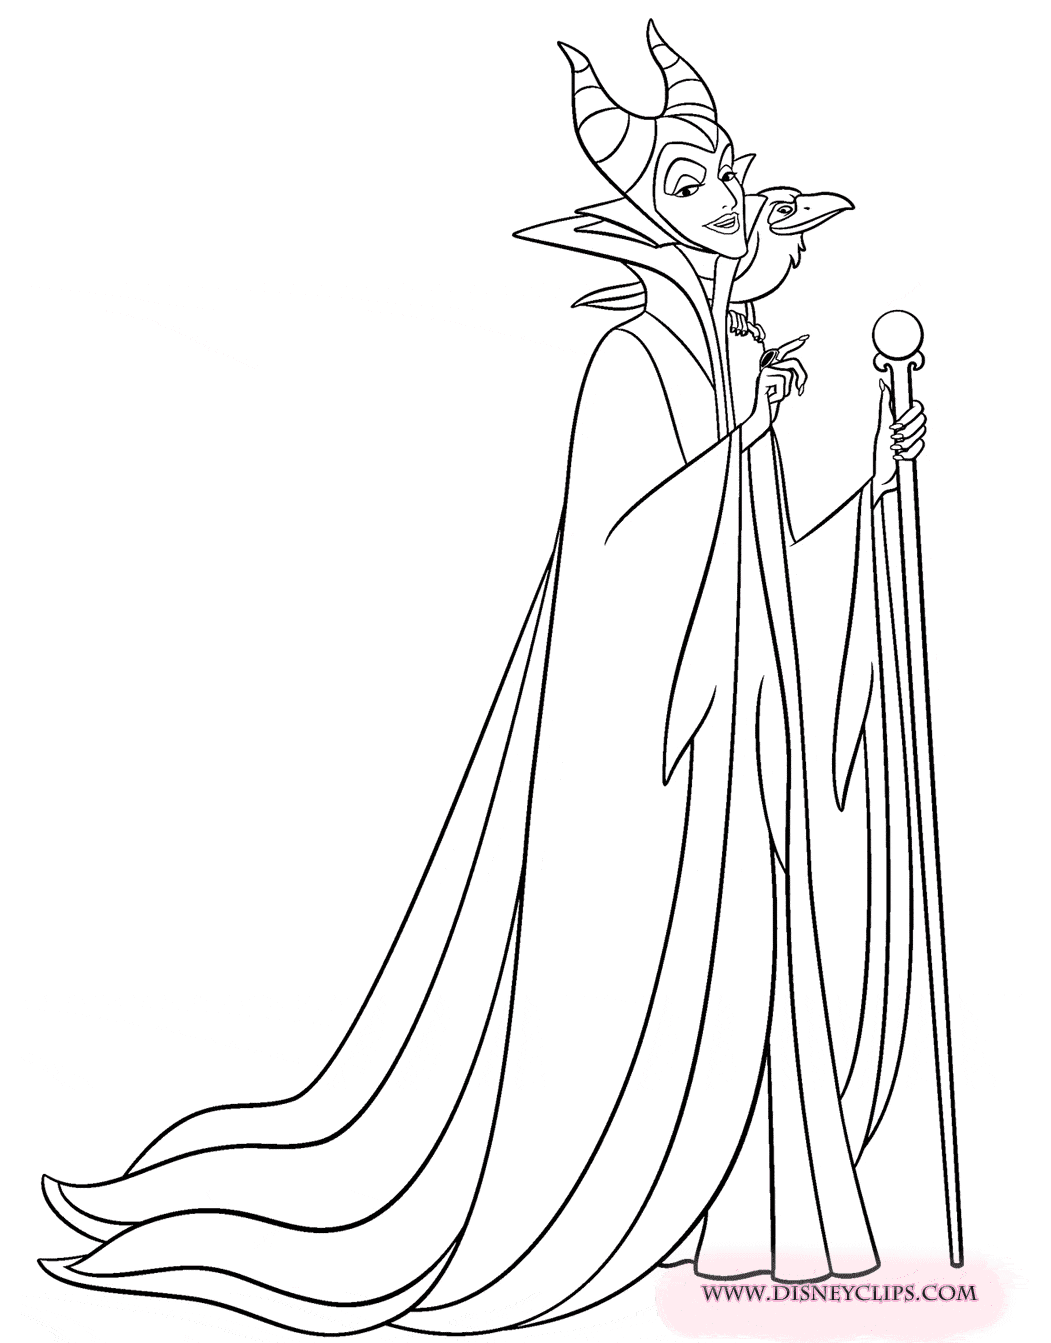 Maleficent and Diablo Coloring Page